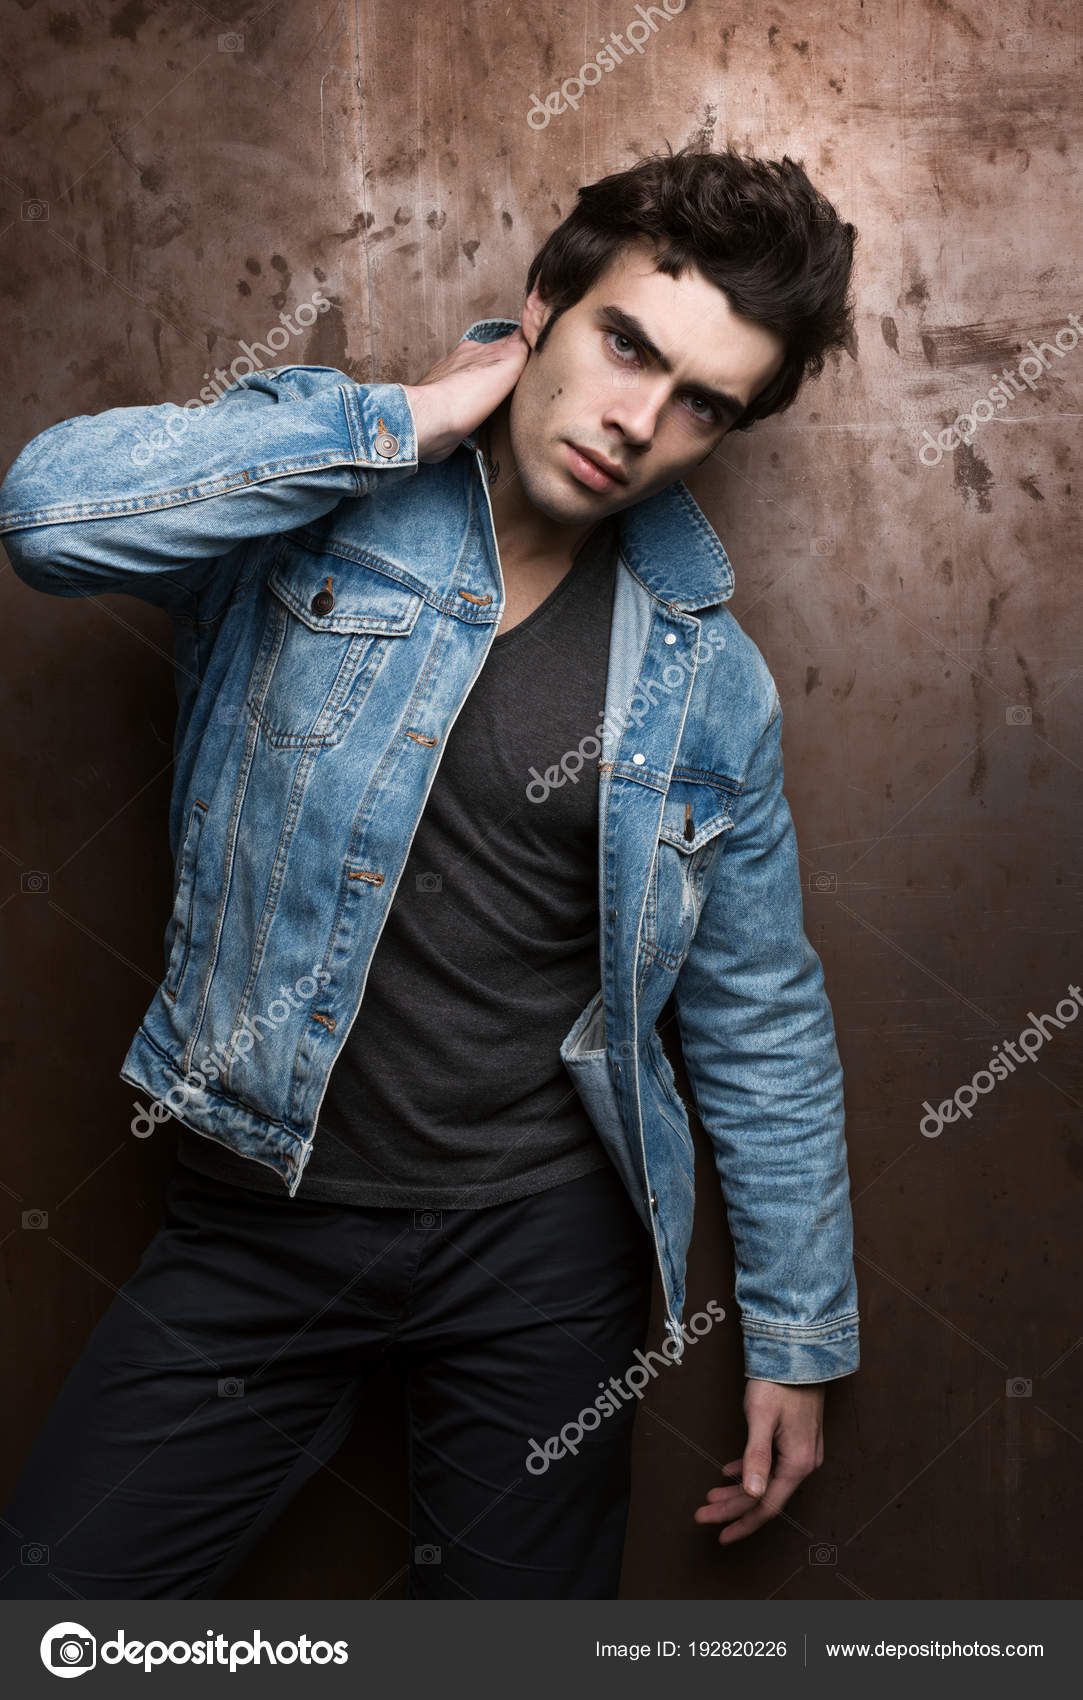 A Man in Denim Jacket and Denim Jeans · Free Stock Photo